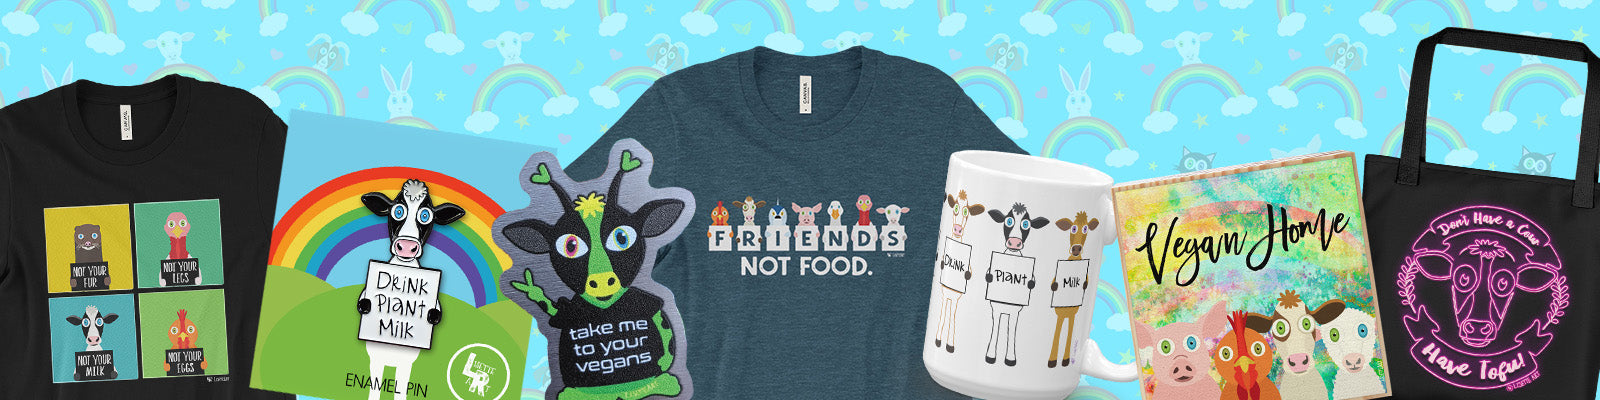 Vegan Themed Apparel and Accessories